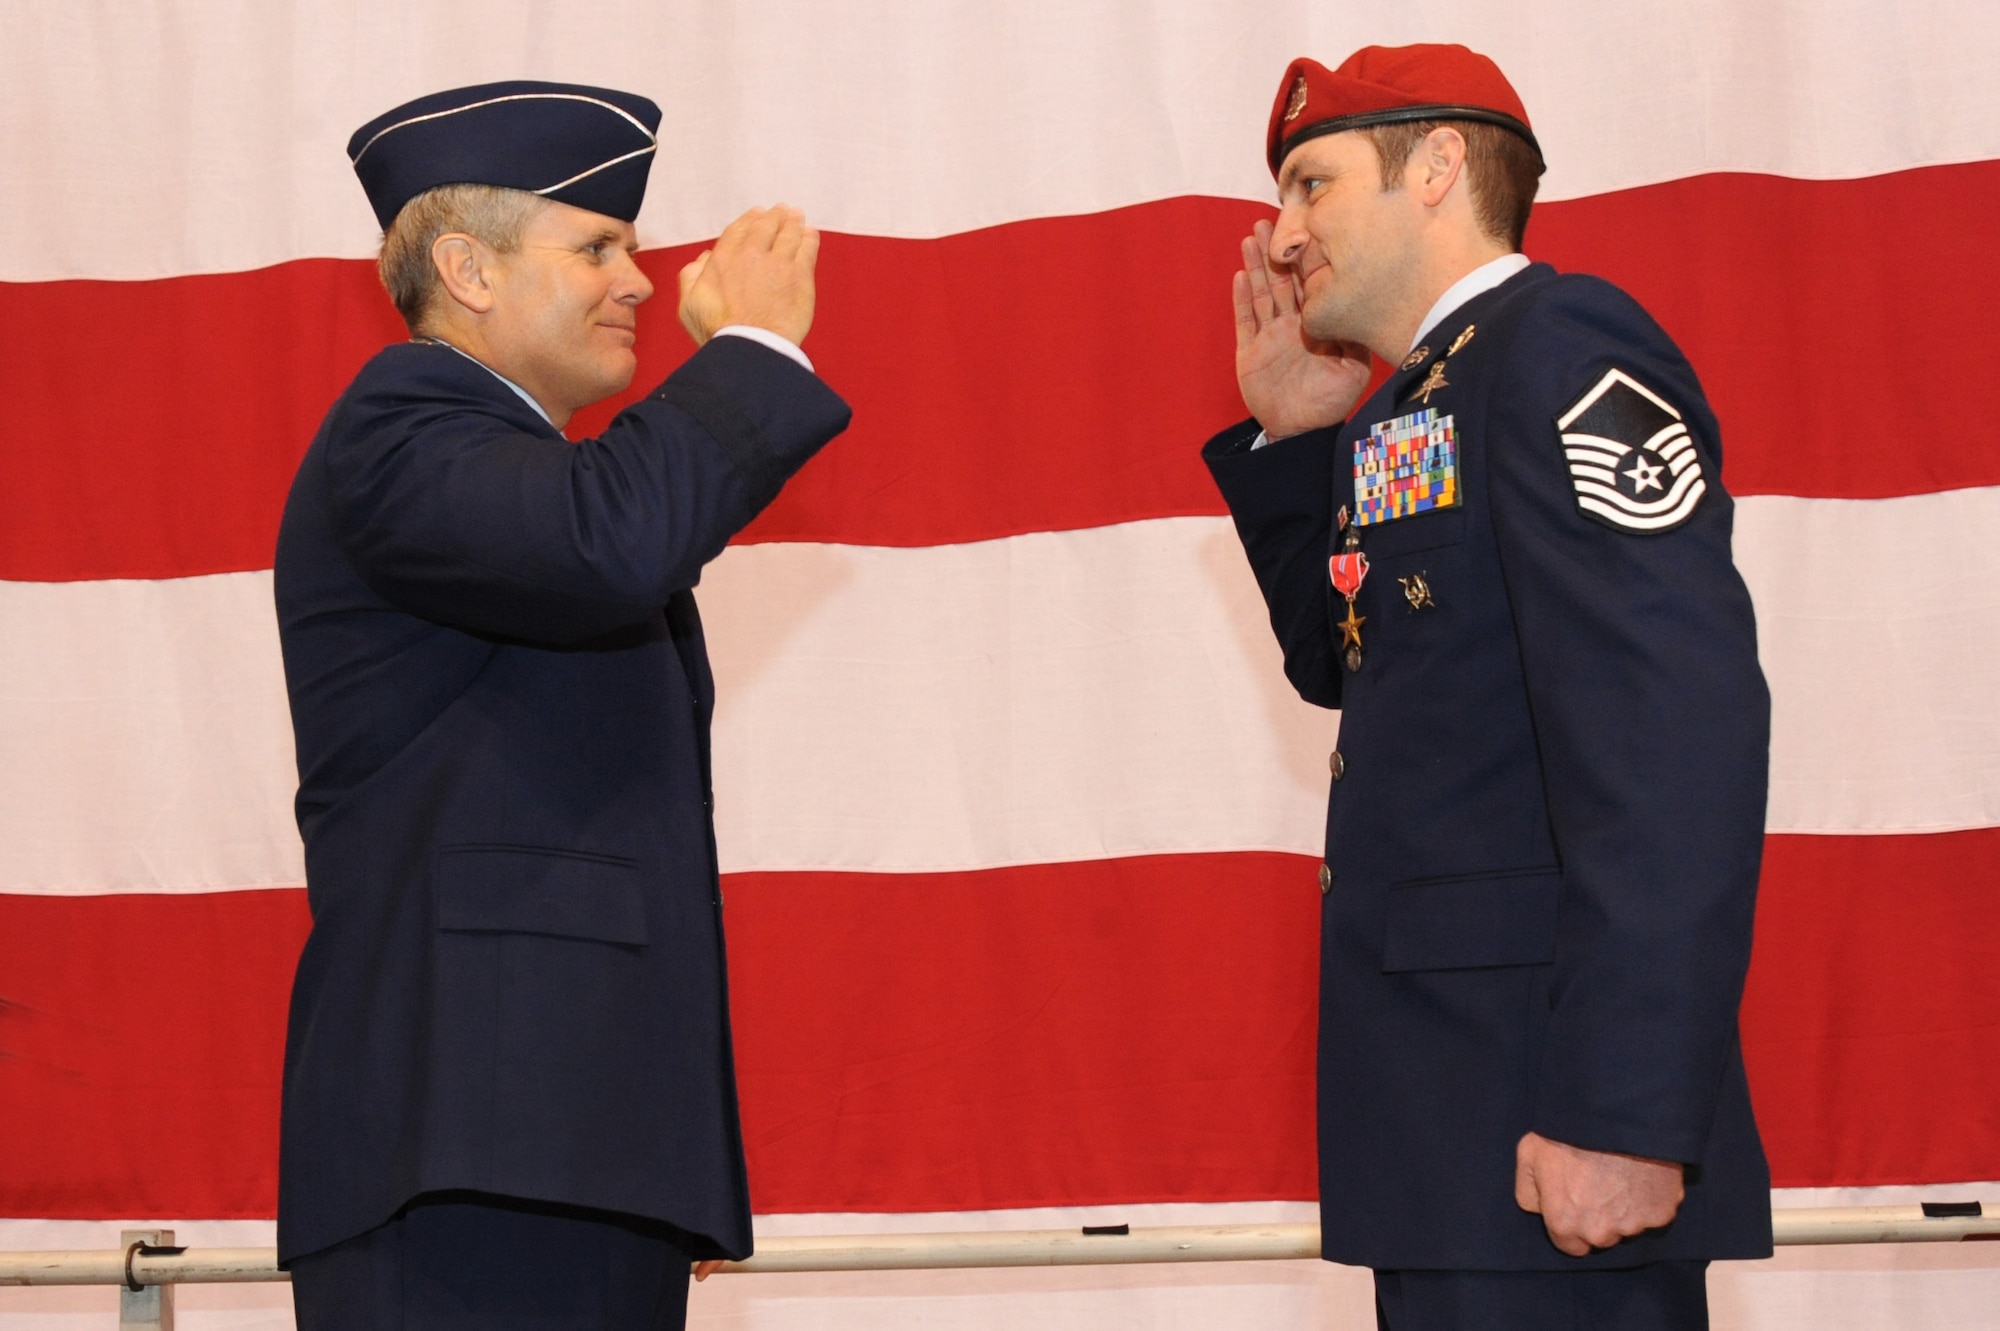 U.S. Air Force Lt. Gen. Eric E. Feil, commander of Air Force Special Operations Command, salutes Master Sgt. Scott A. Geisser of the 125th Special Tactics Squadron after he received his Bronze Star Medal during an award ceremony held at the Portland Air National Guard Base, Portland, Ore., Jan. 23.  The event honored Airmen from the unit with five Bronze Star Medals and one Purple Heart medal.  The Airmen earned the medals during recent deployments to the Middle East. Fiel flew in from AFSOC headquarters at Hulburt Field, Fla., for the ceremony (U.S. Air Force photo by Tech. Sgt. John Hughel, 142nd Fighter Wing Public Affairs/Released)